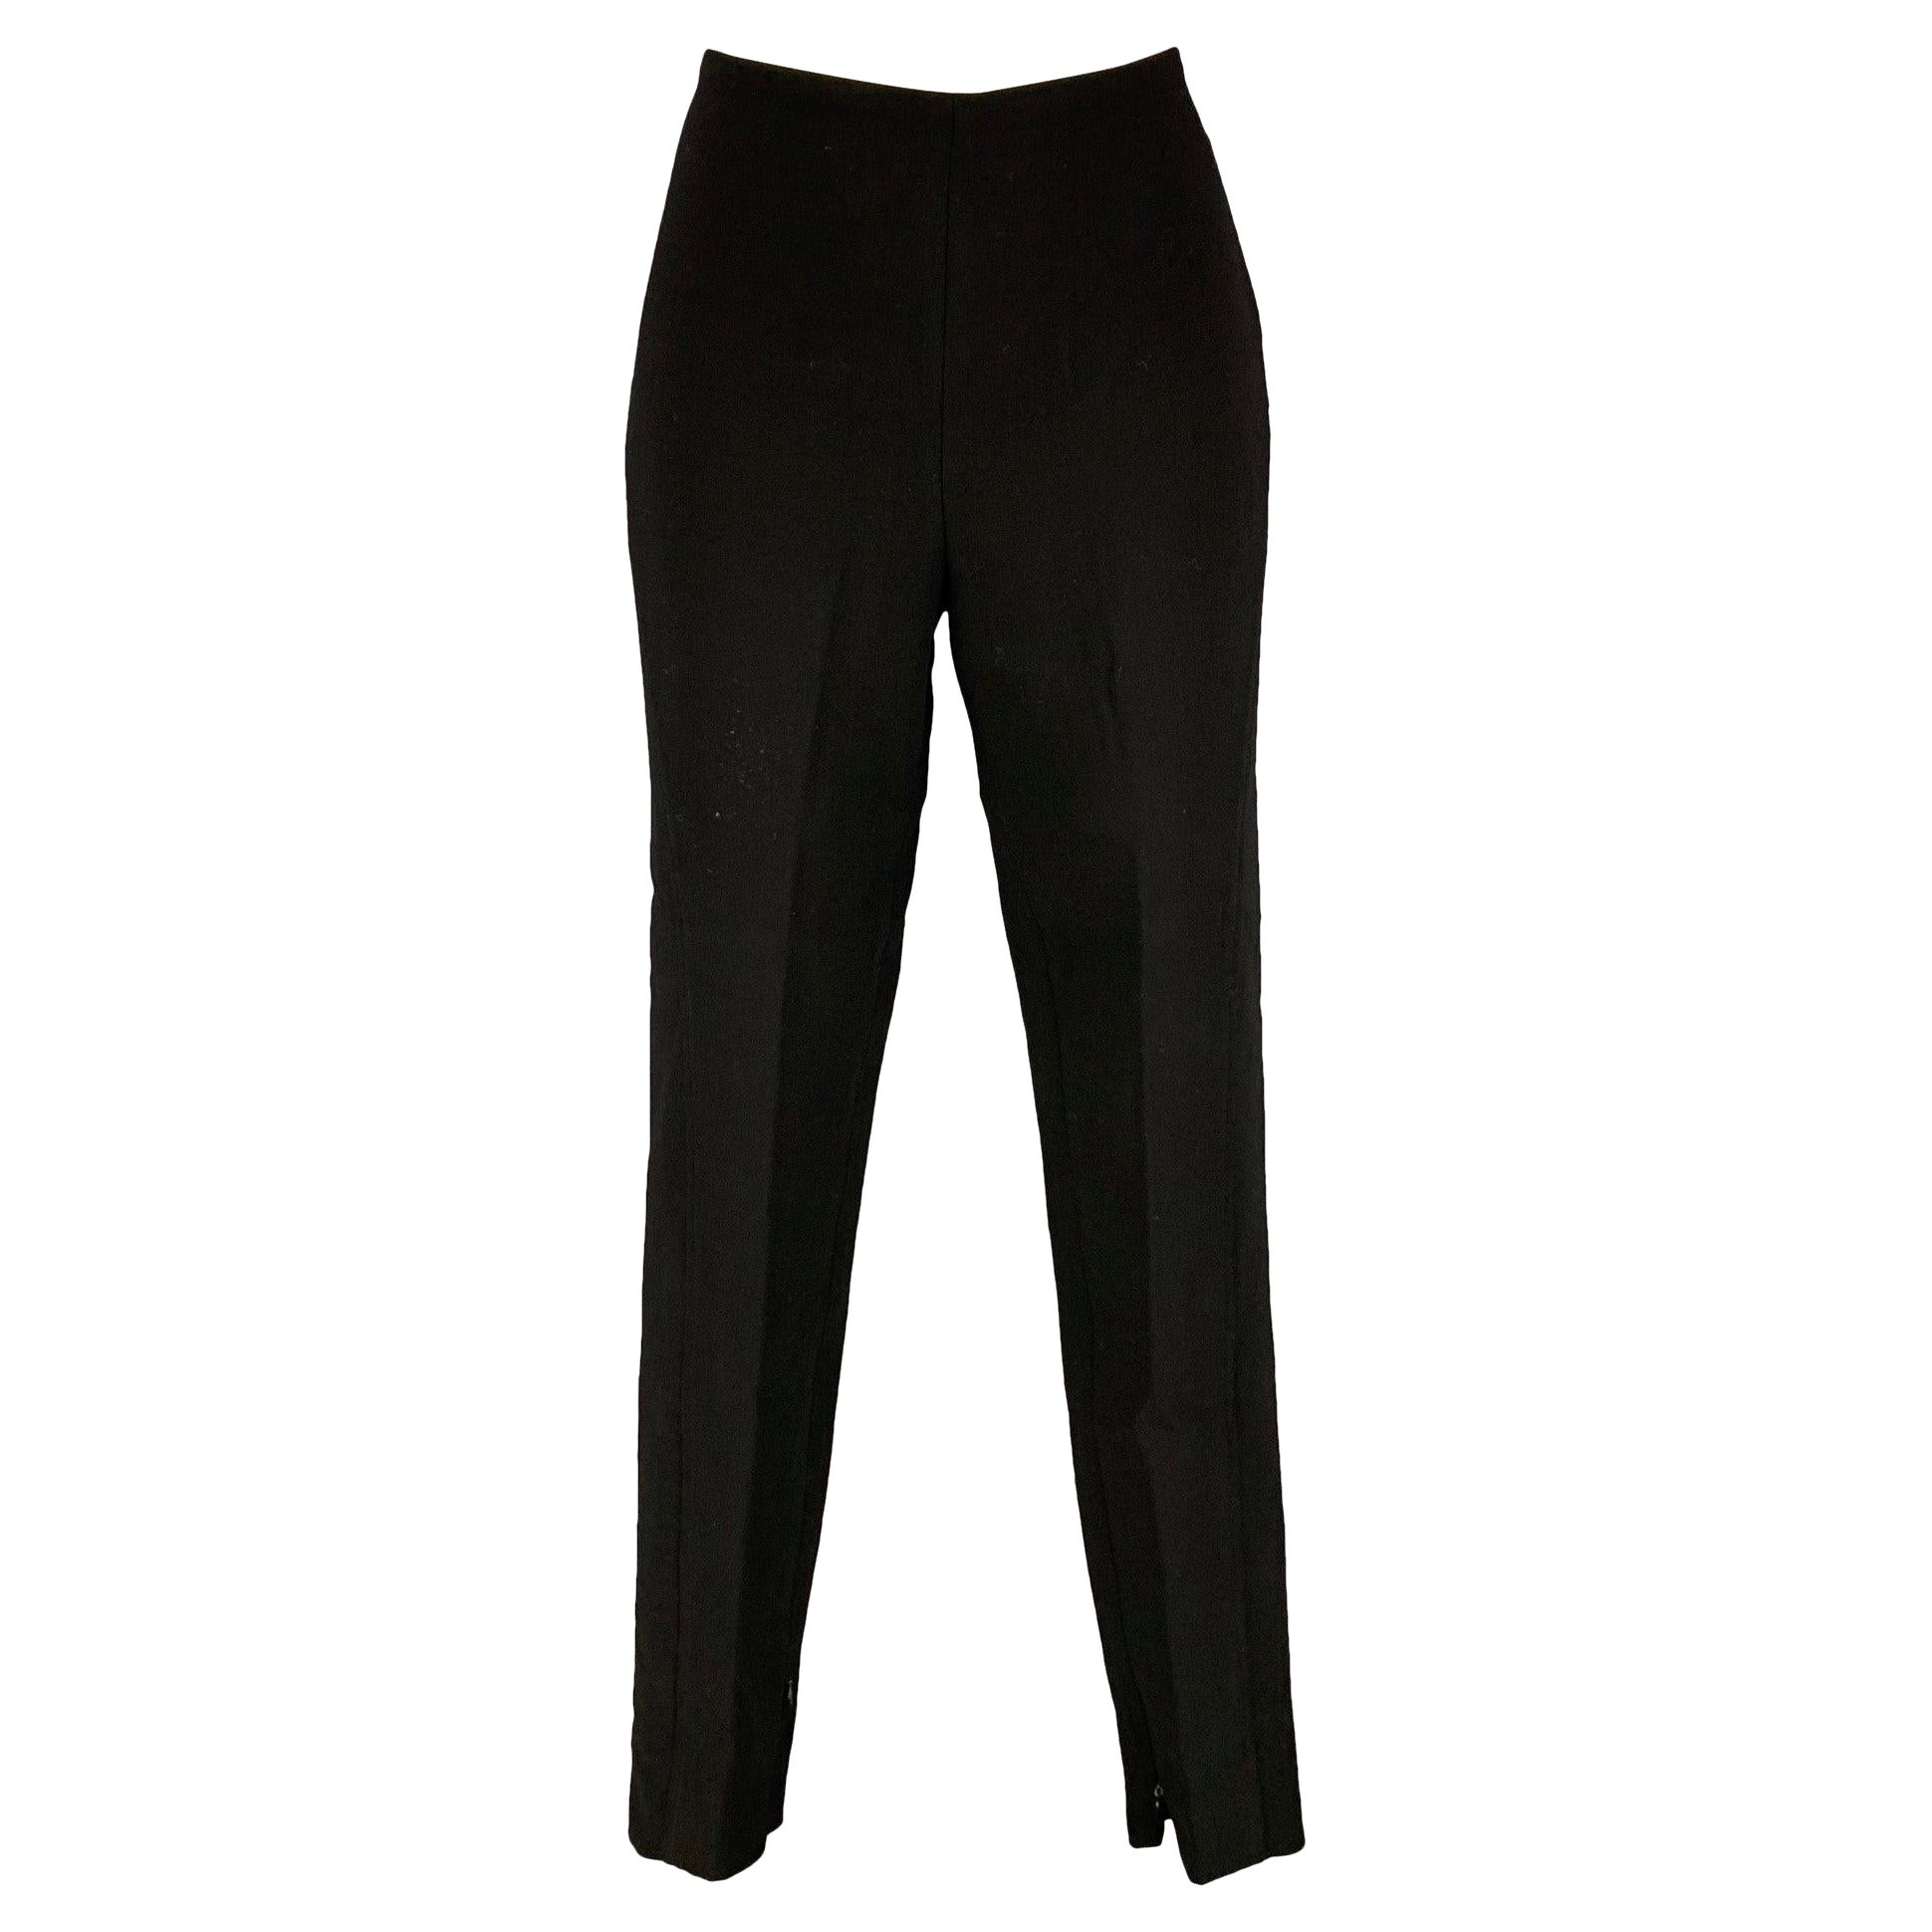 RALPH LAUREN Size 6 Black Wool Fitted Dress Pants For Sale